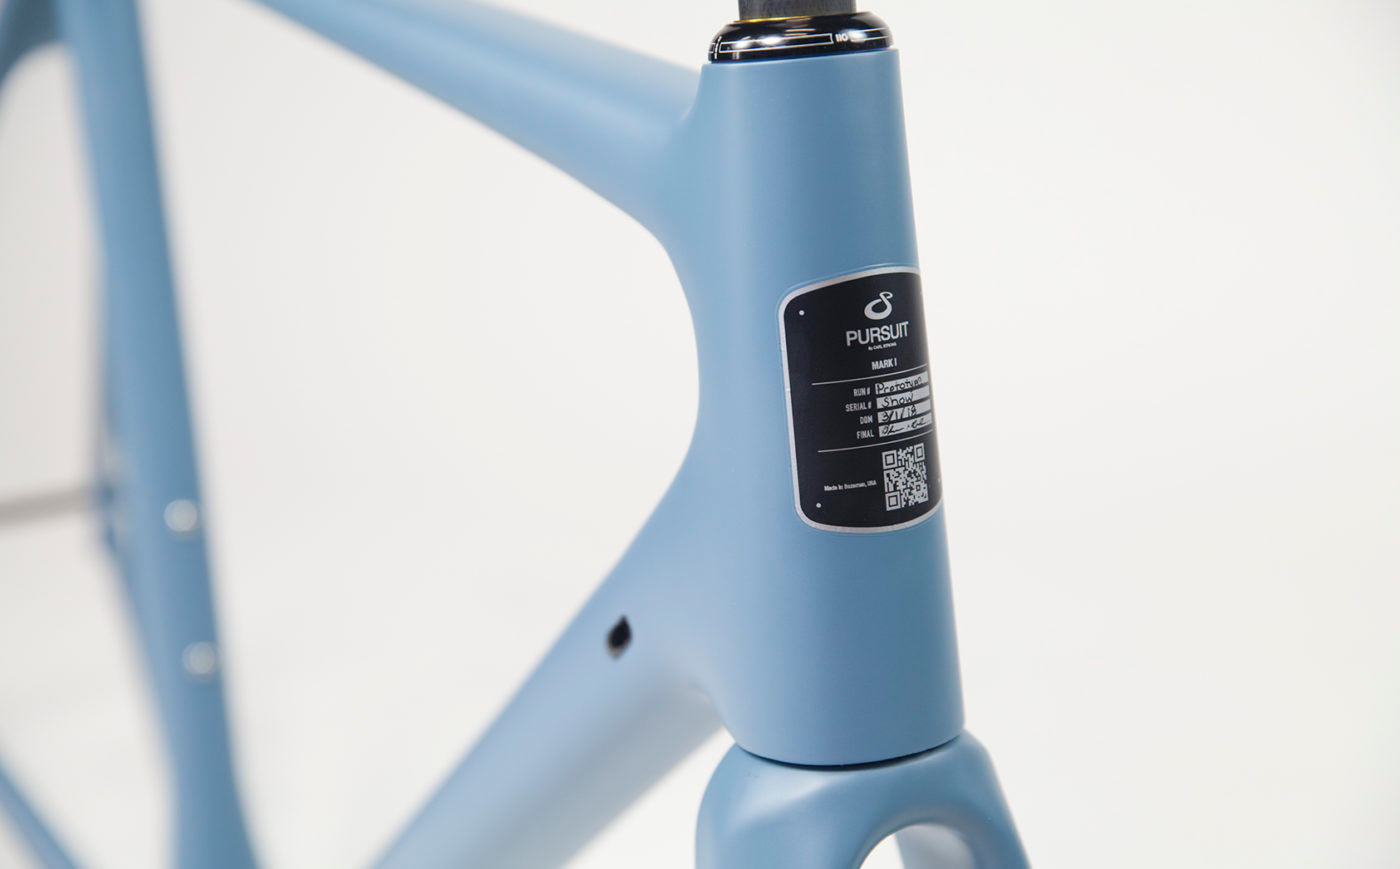 carl strong pursuit cycles mark 1 road bike tech details and development story